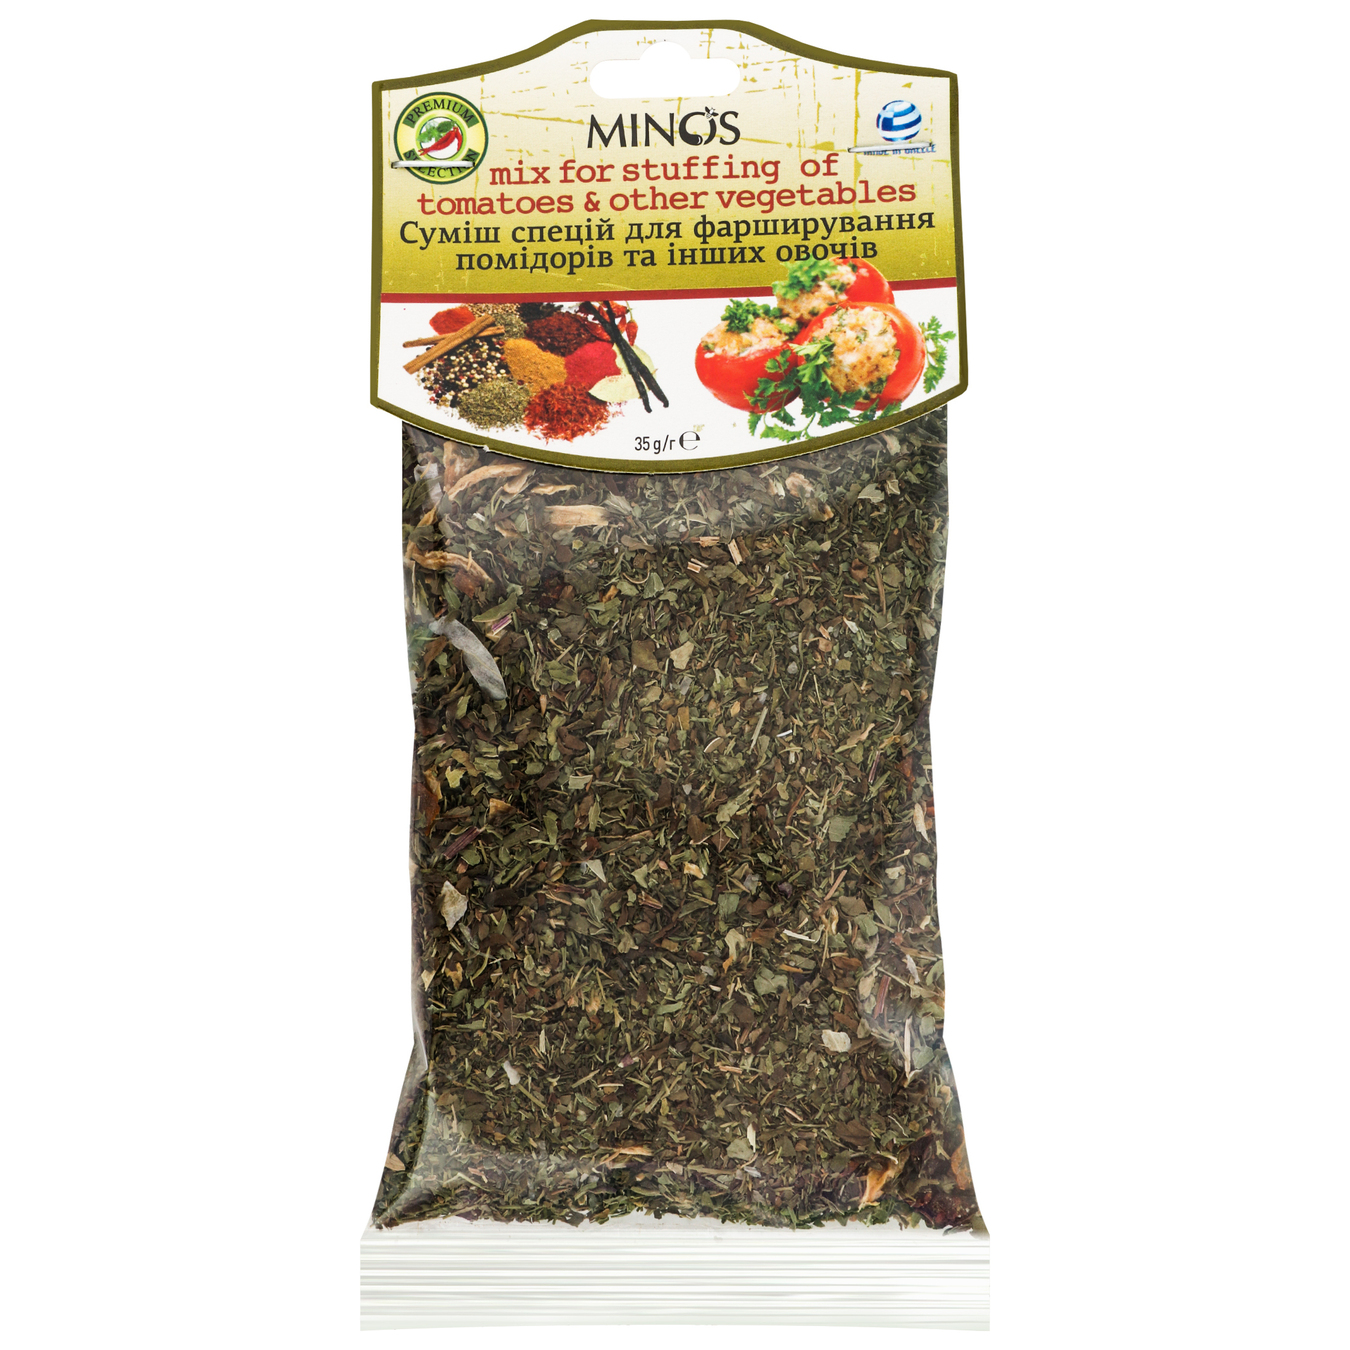 Spices Mix Minos For Stuffing Tomatoes And Other Vegetables 50g